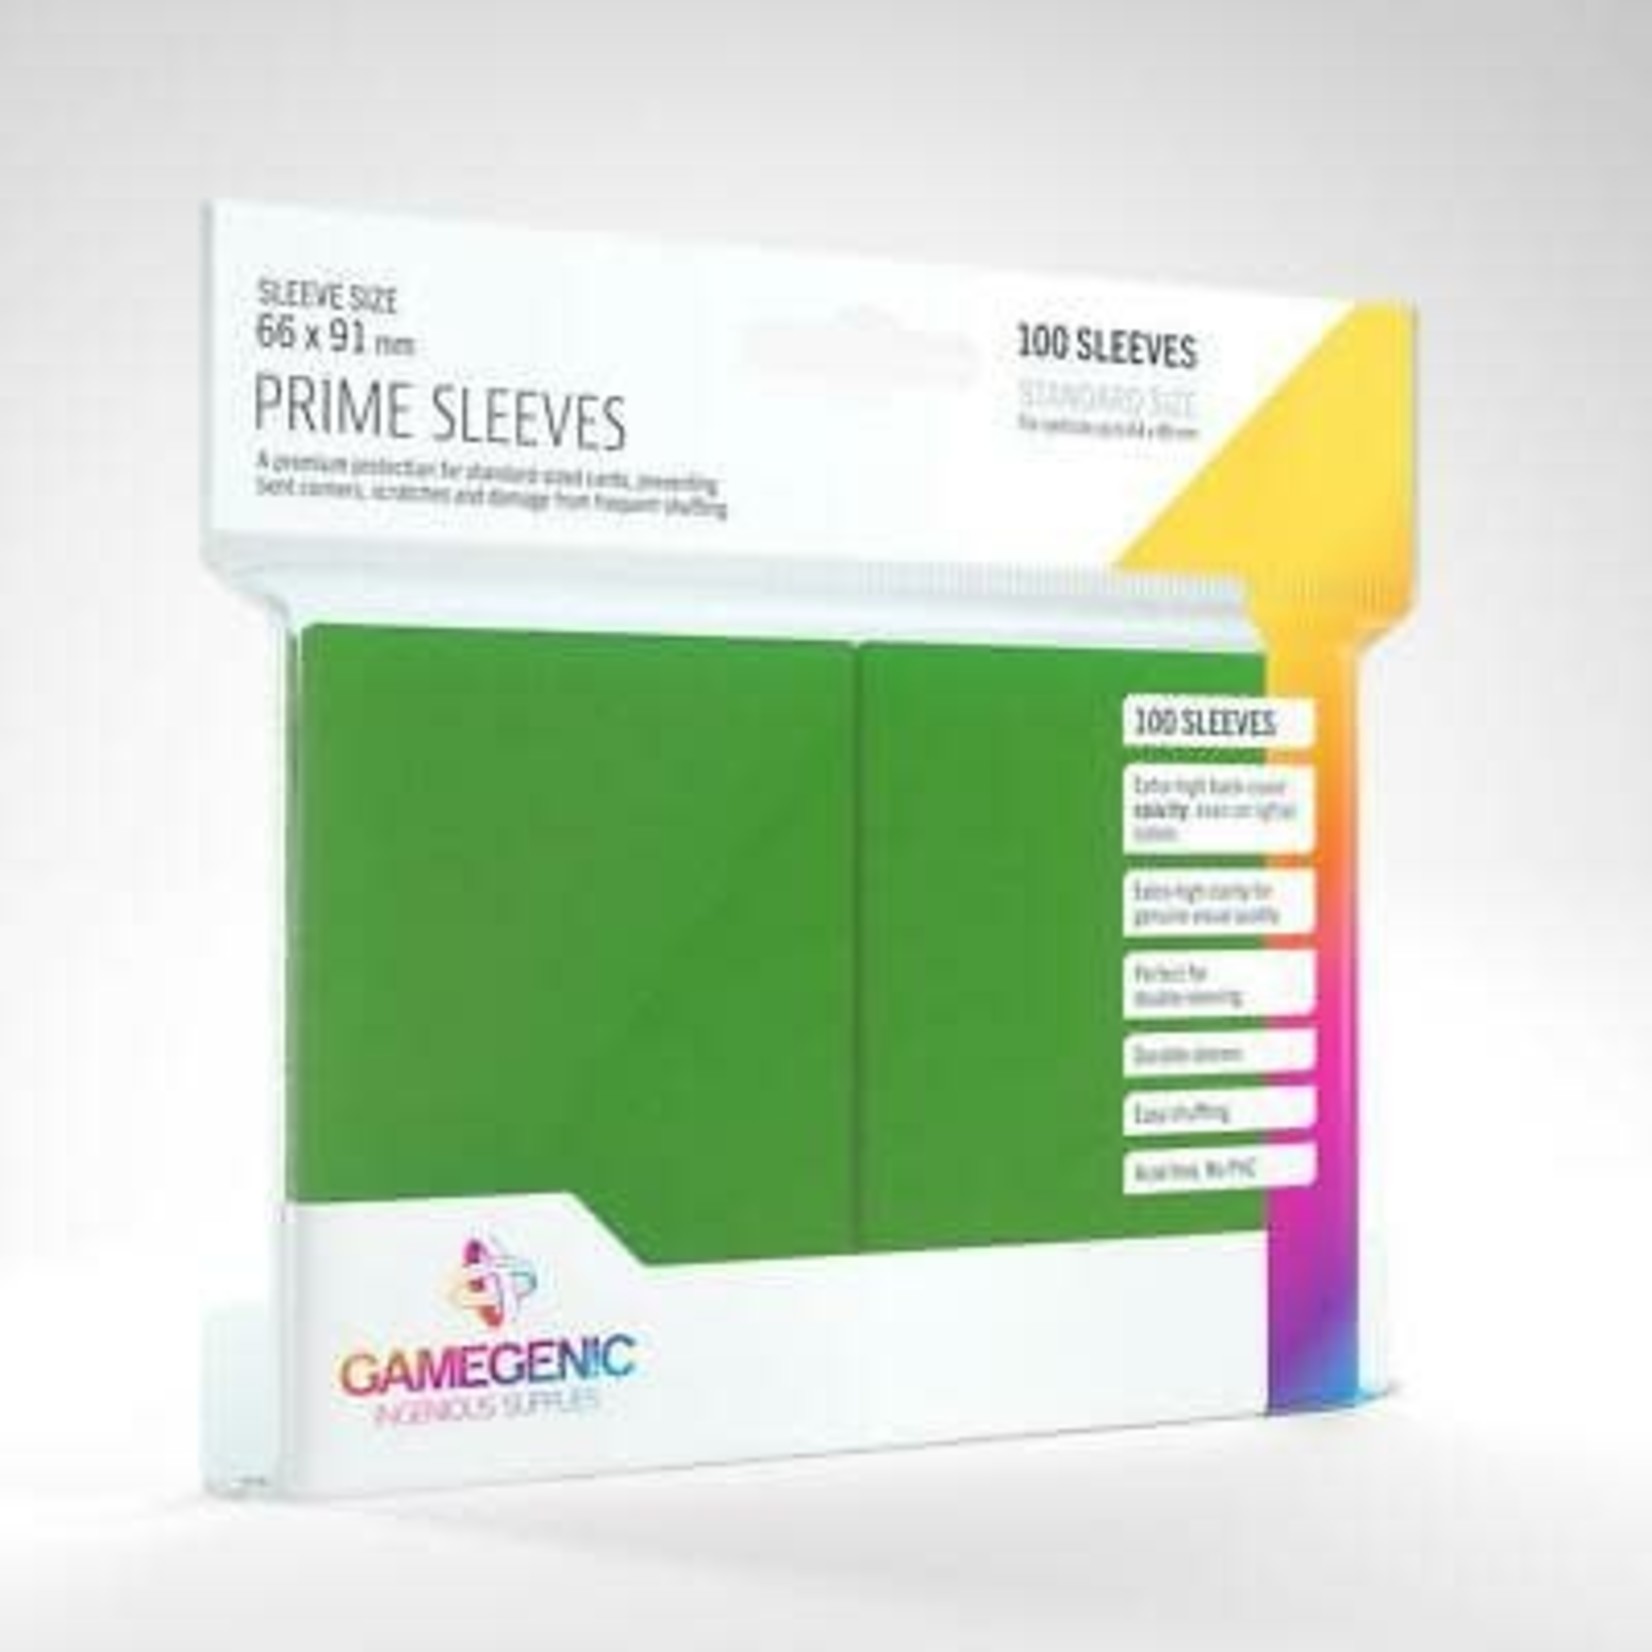 Gamegenic GameGenic Prime Sleeves Green 100 ct